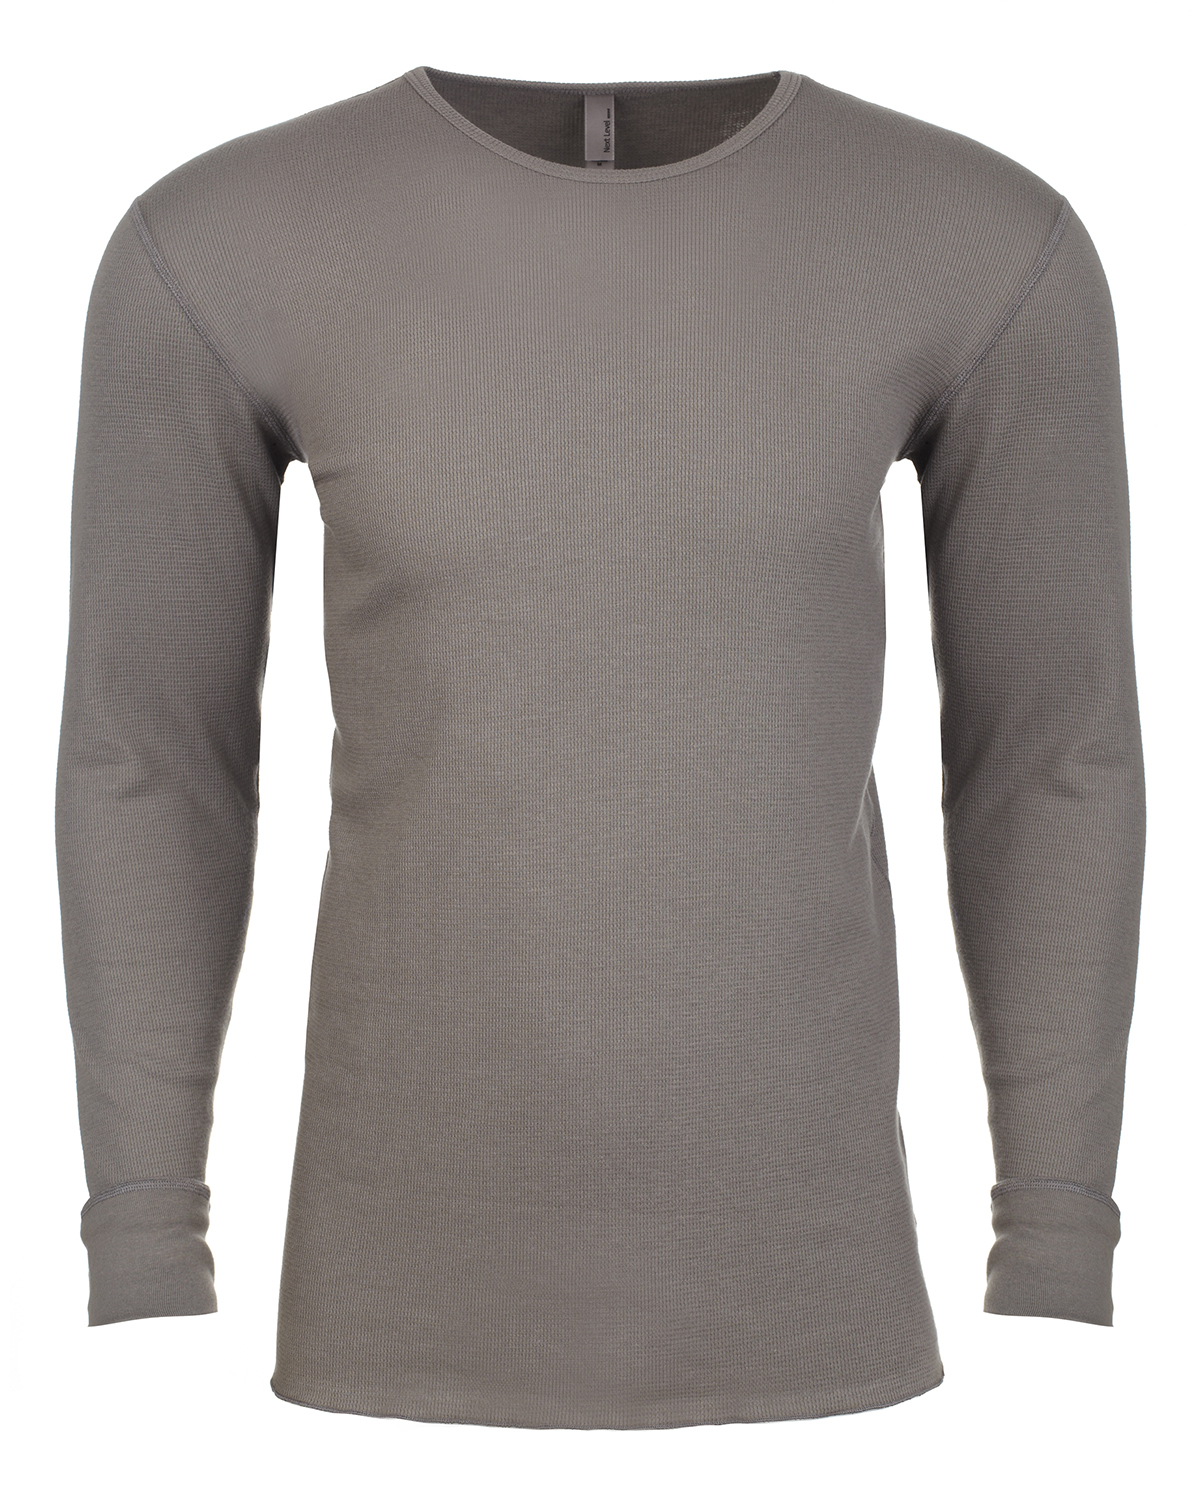 Next Level Apparel 8201 - Unisex Long Sleeve Thermal